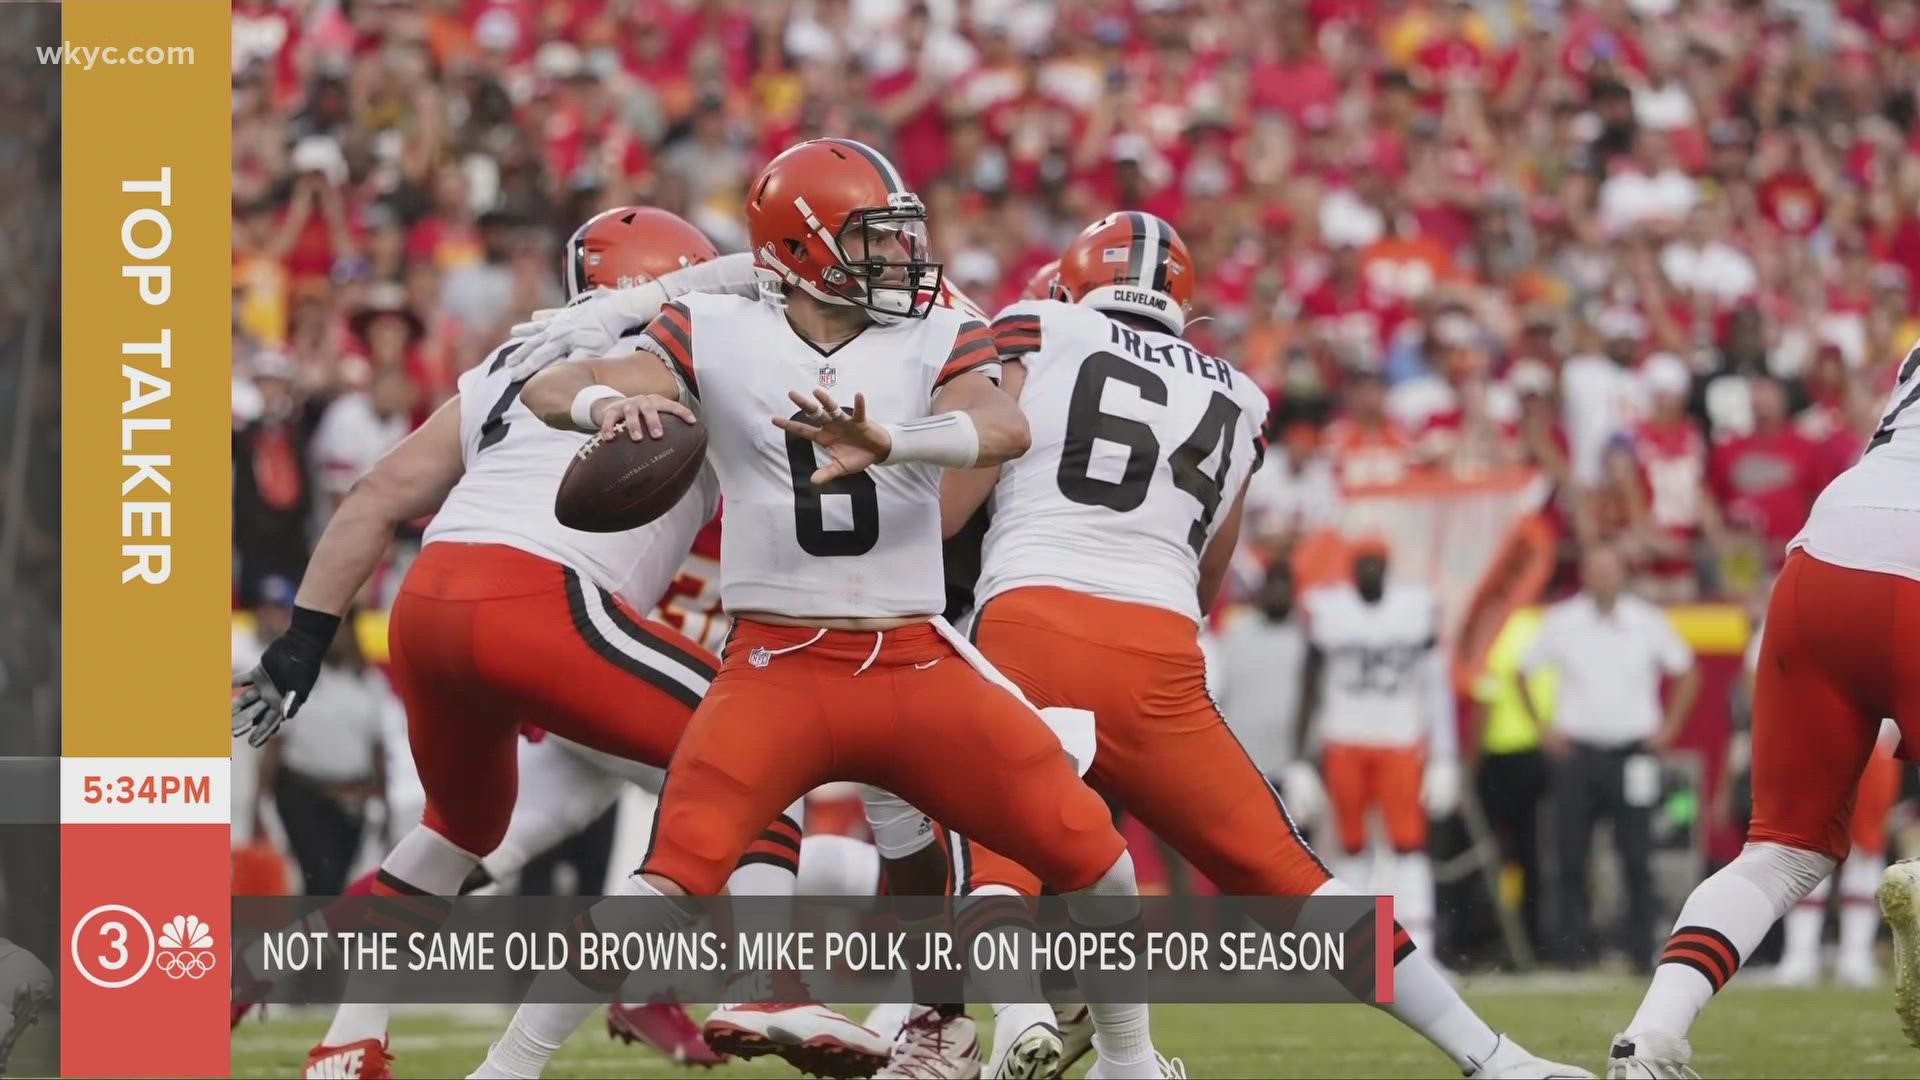 Mike Polk Jr. is one of the biggest Browns fans we know. Check out his thoughts on the upcoming season.